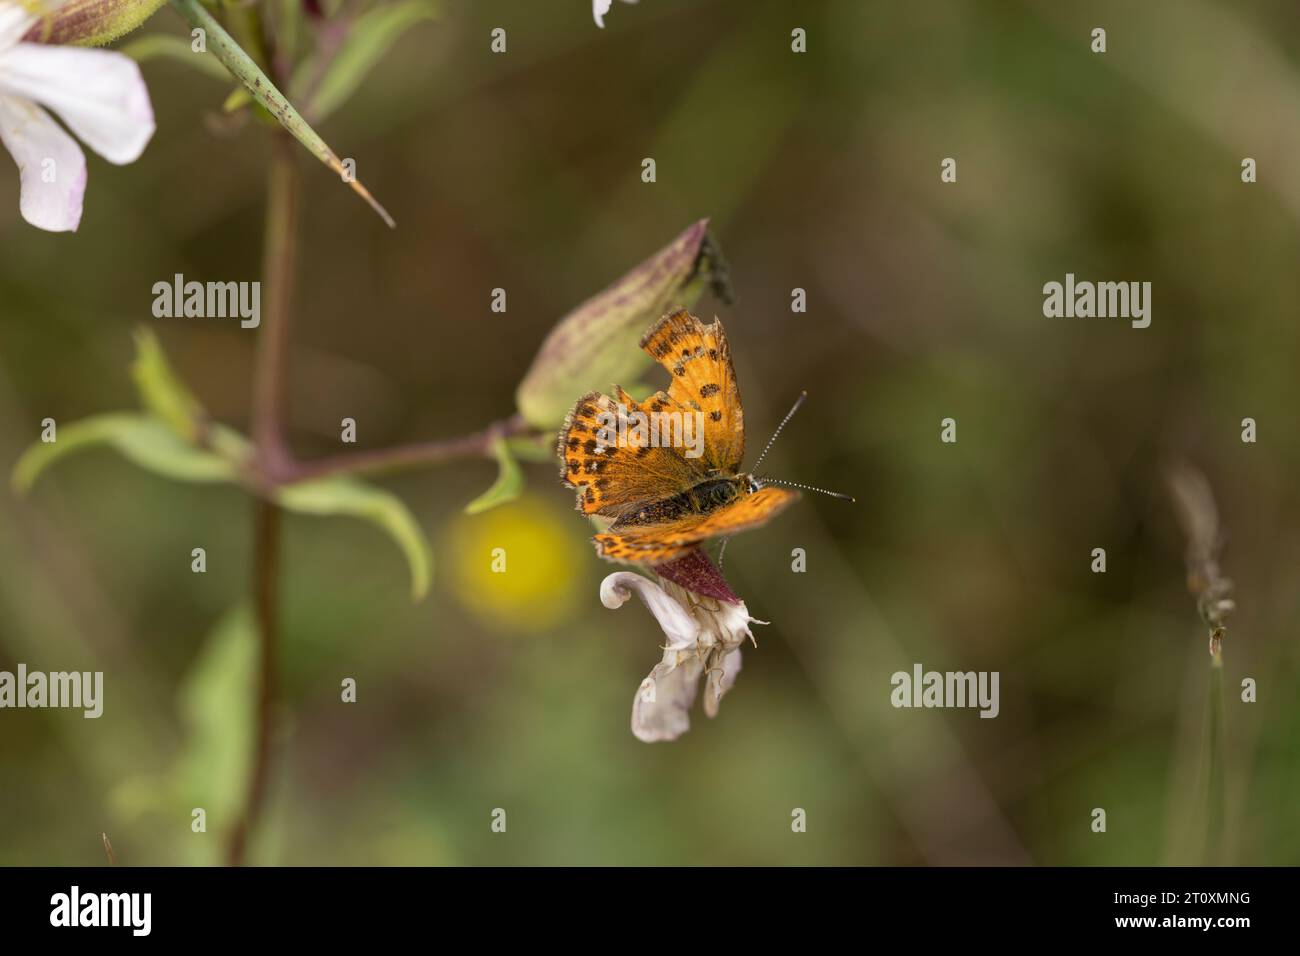 Čiobrelinis auksinukas Lycaena alciphron Family Lycaenidae Genus Lycaena Purple-shot copper butterfly with damaged wings wild nature insect wallpaper, Stock Photo